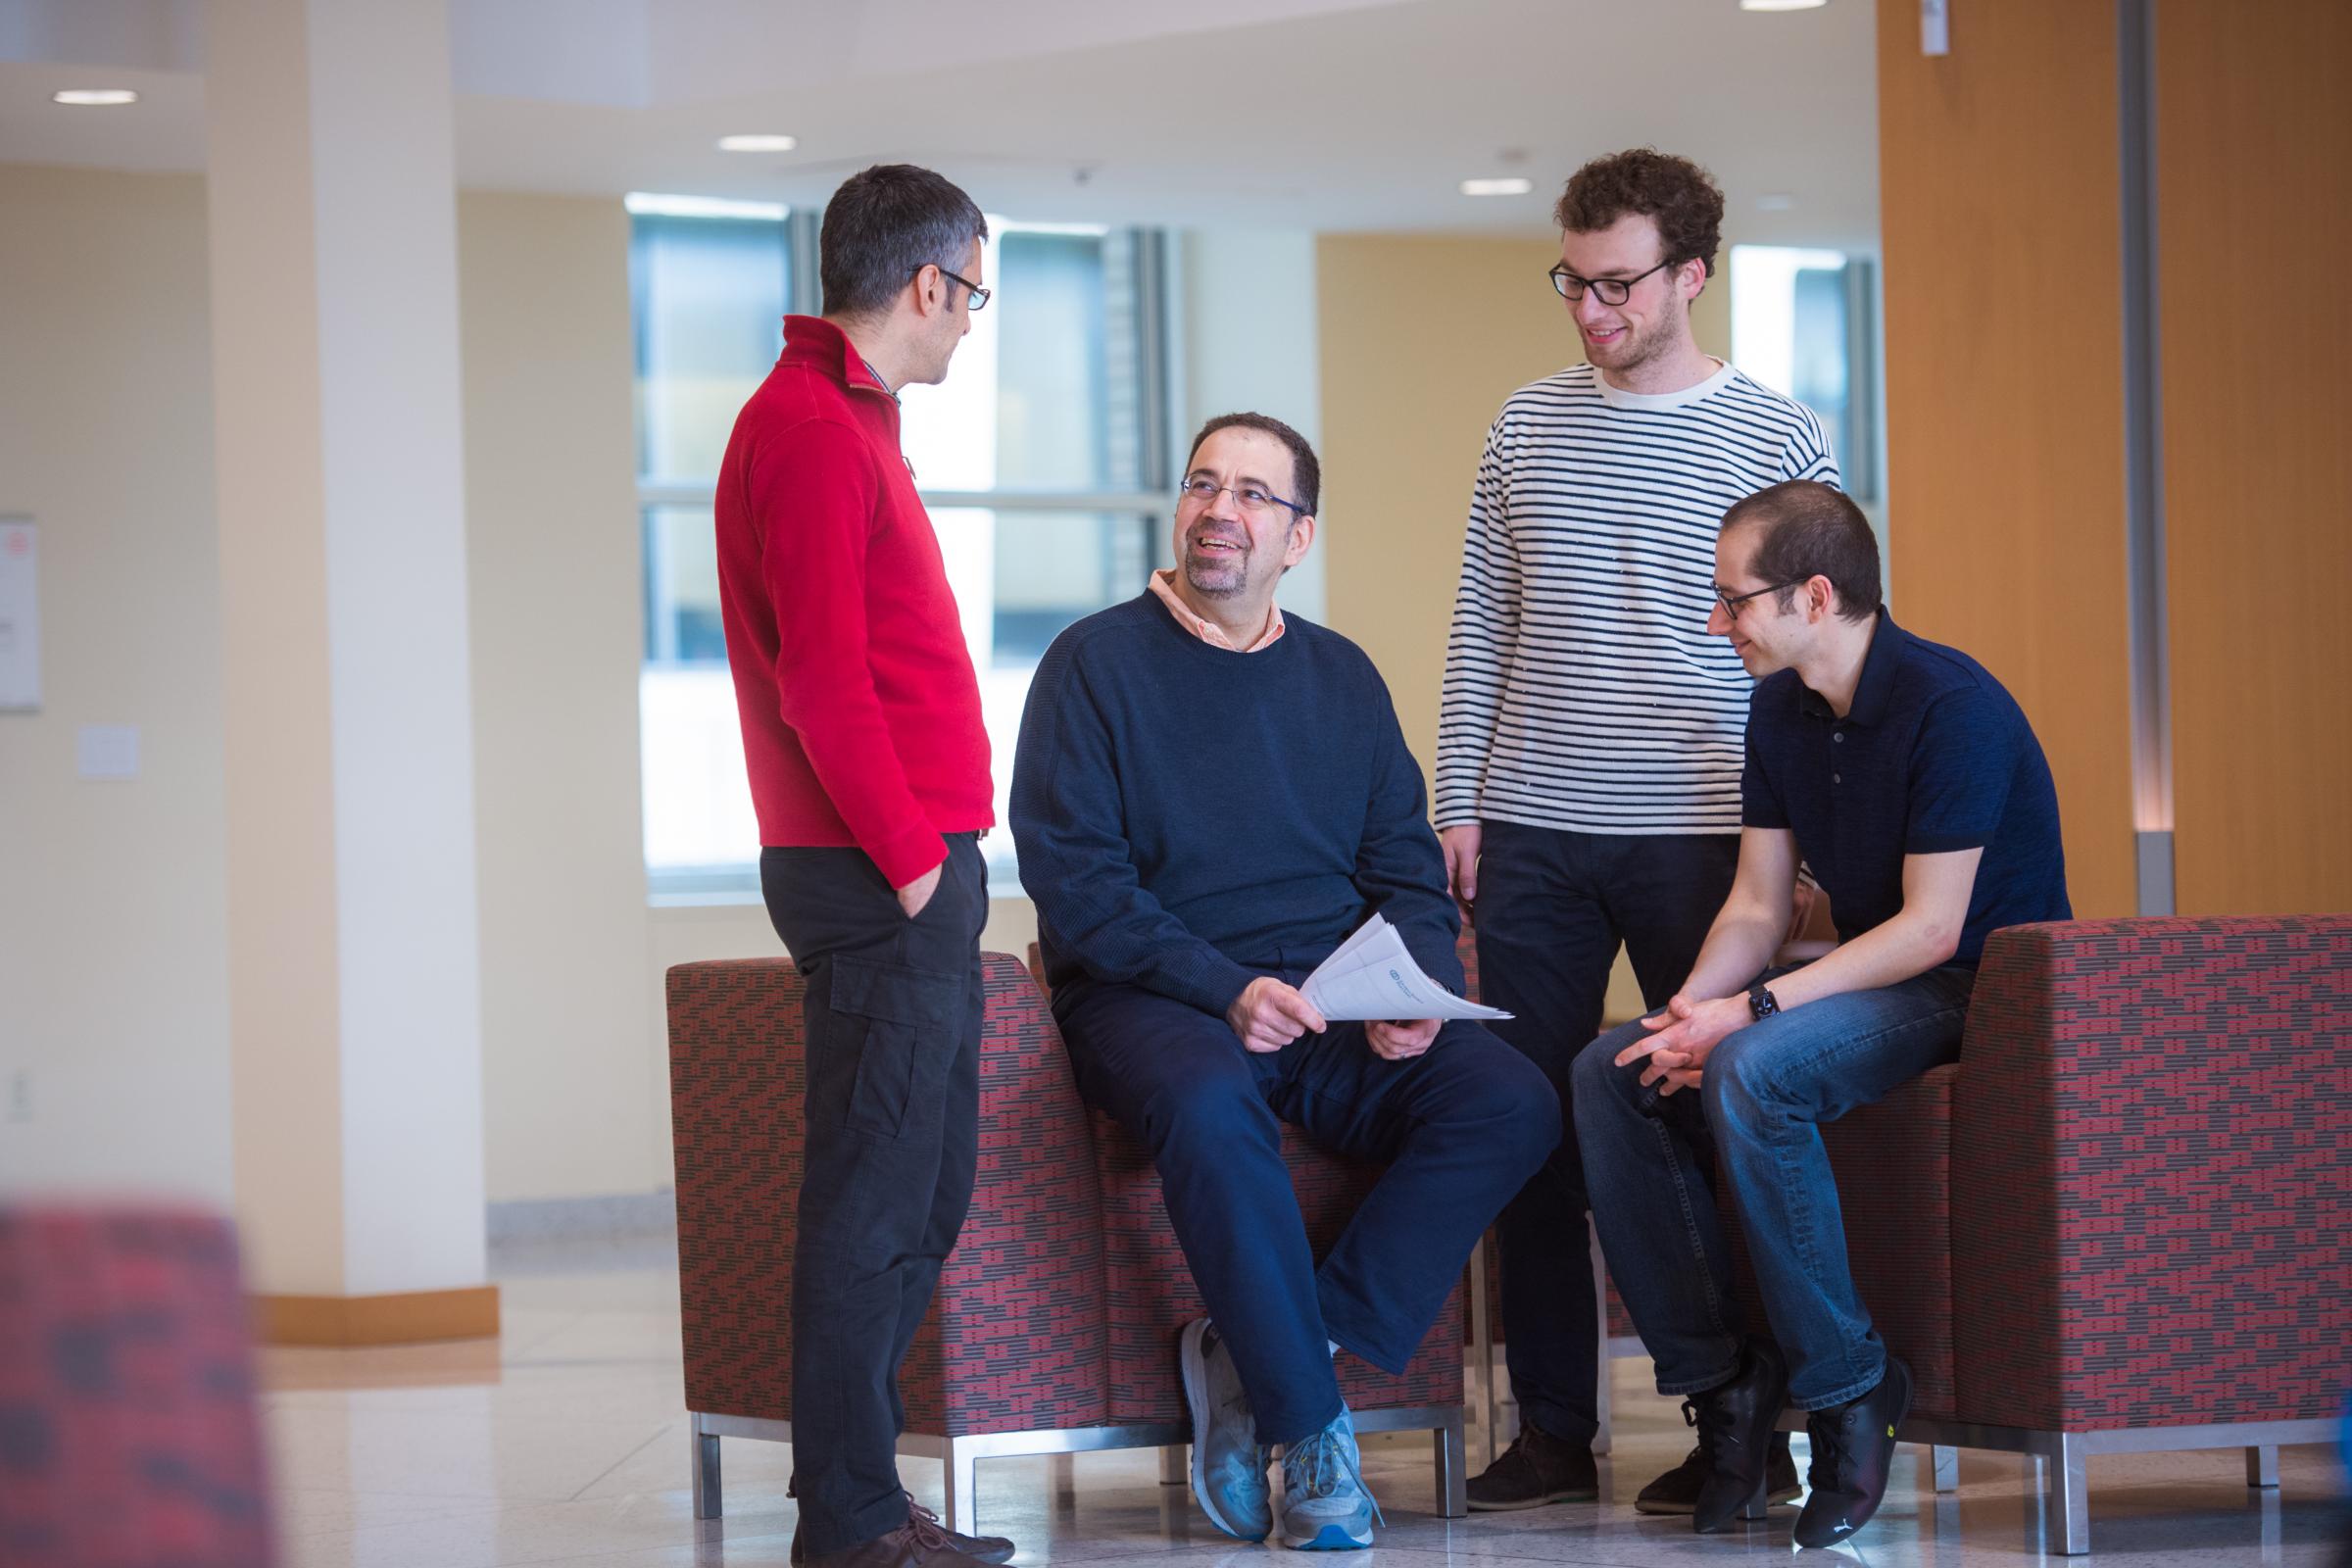 Daron Acemoglu with colleagues and grad students, photo by Gretchen Ertl